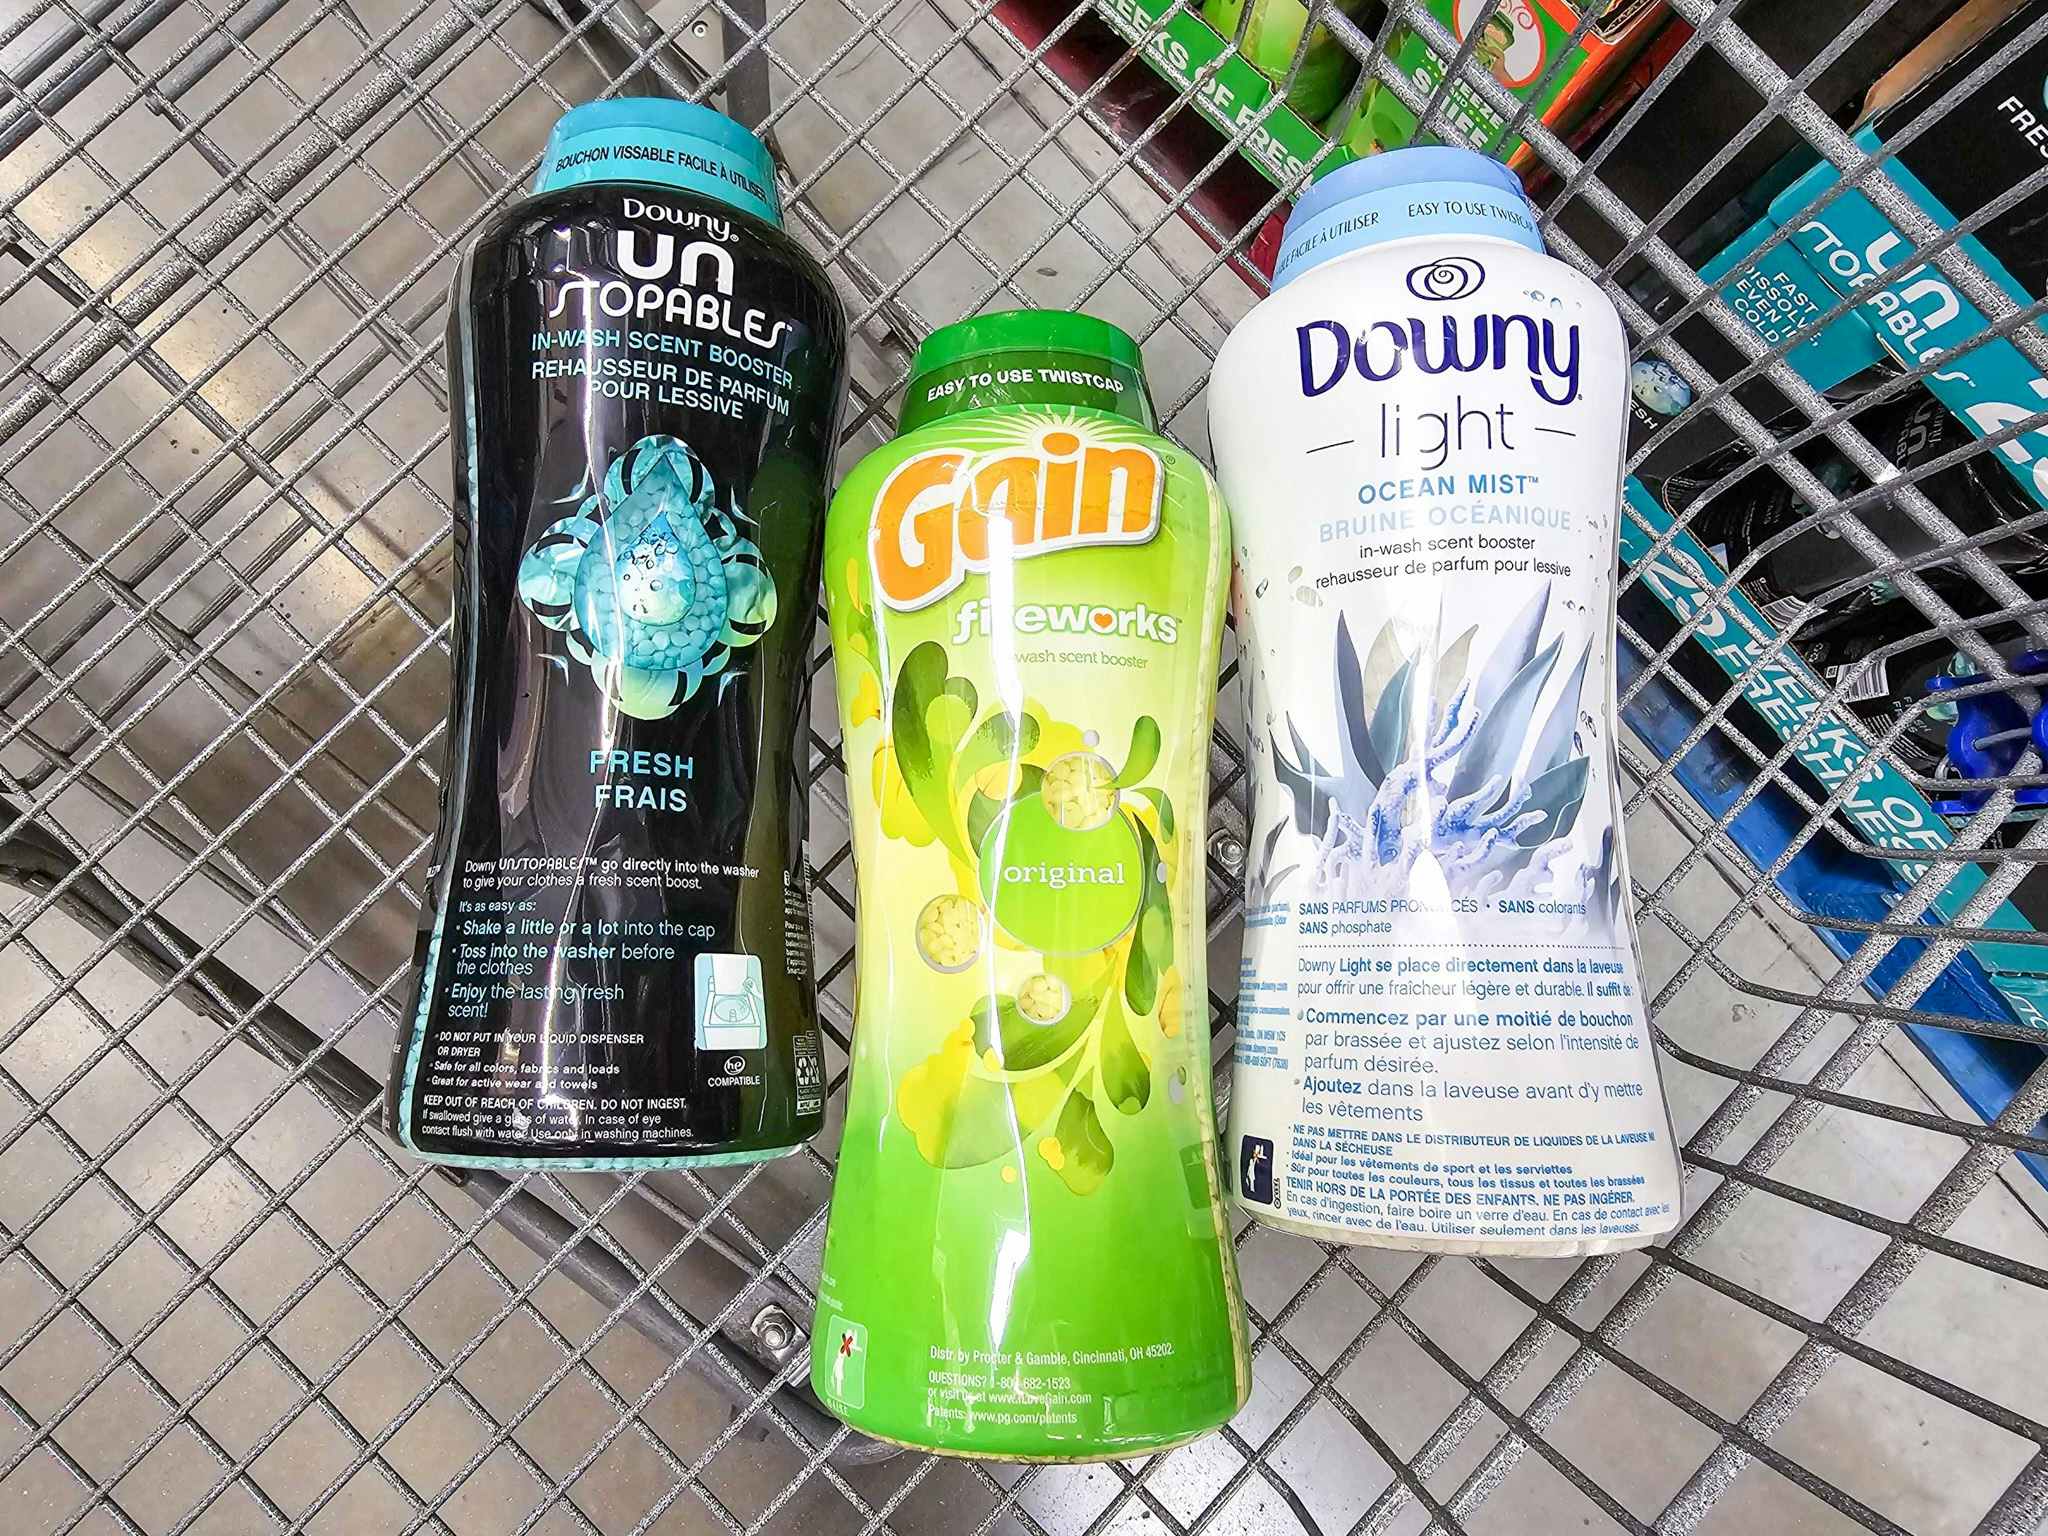 gain and downy in-wash scent bead containers in a shopping cart